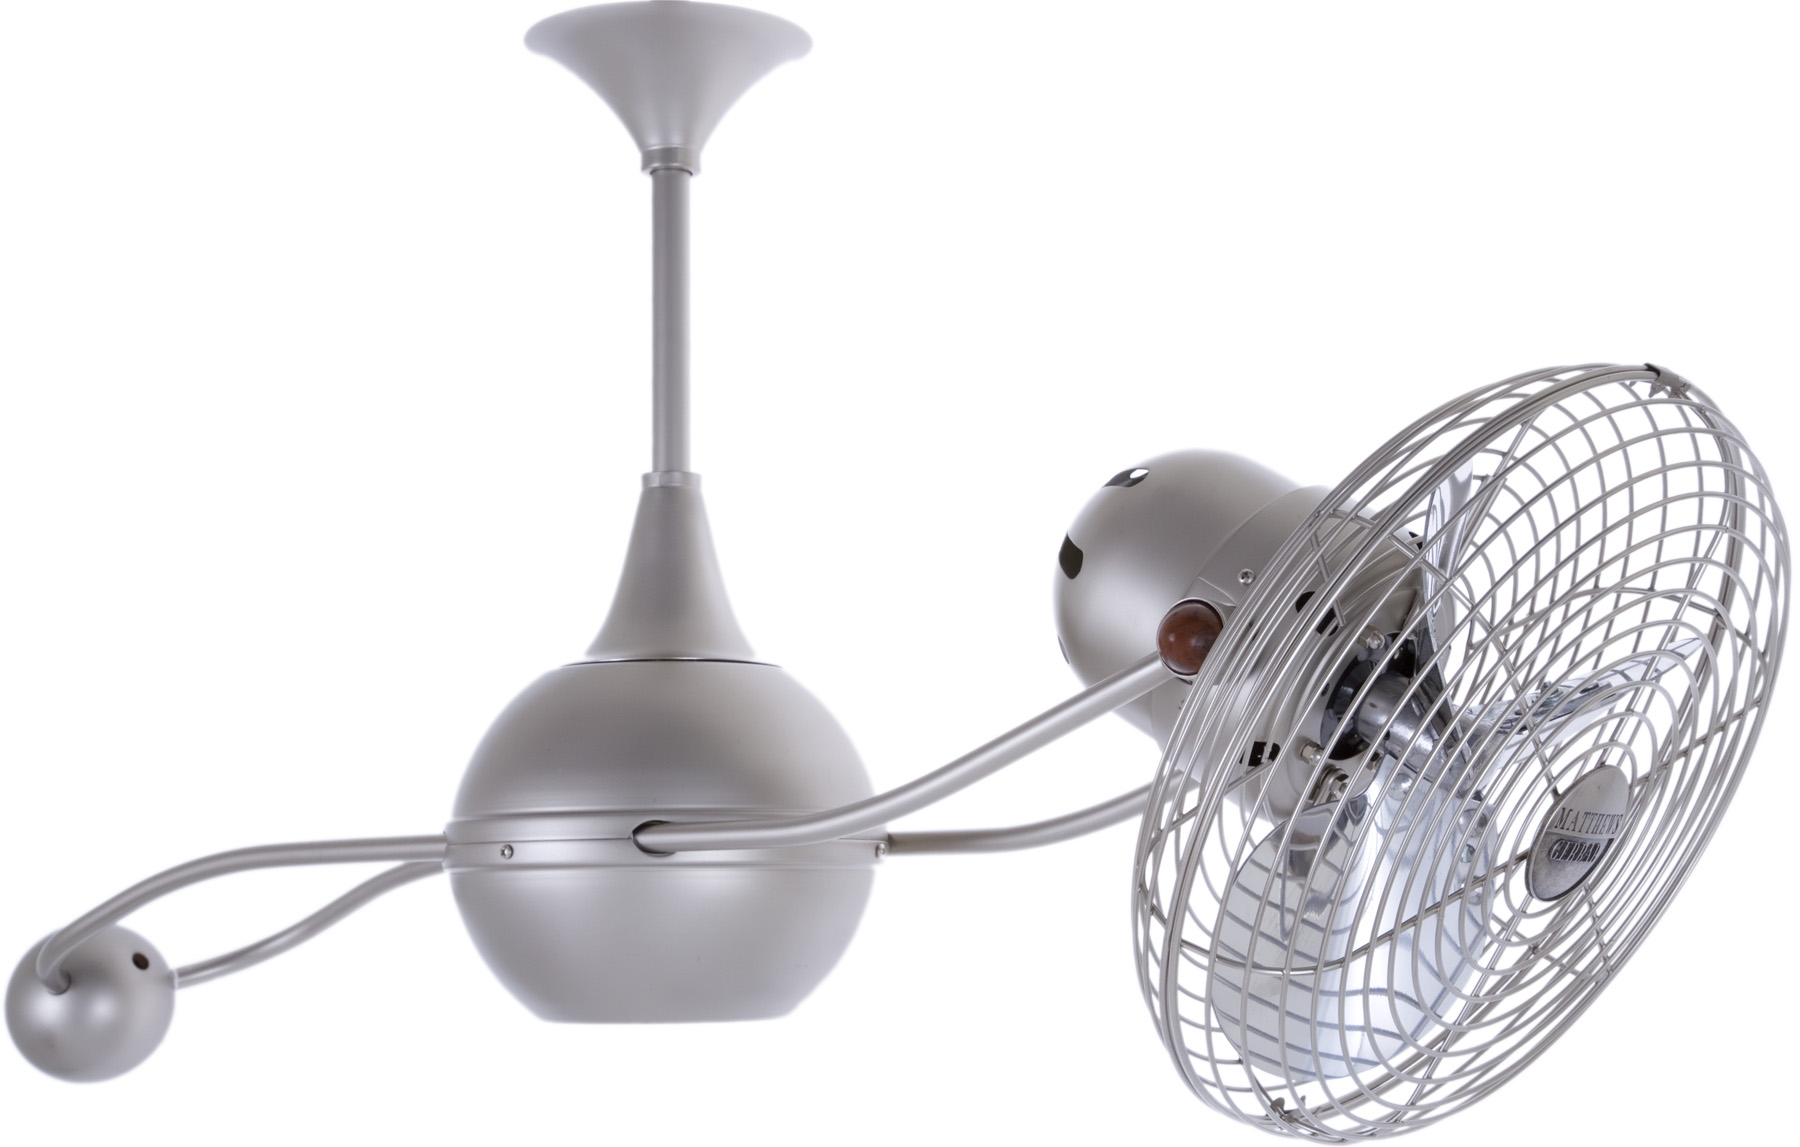 Brisa 2000 Ceiling Fan in Brushed Nickel Finish with Metal Blades